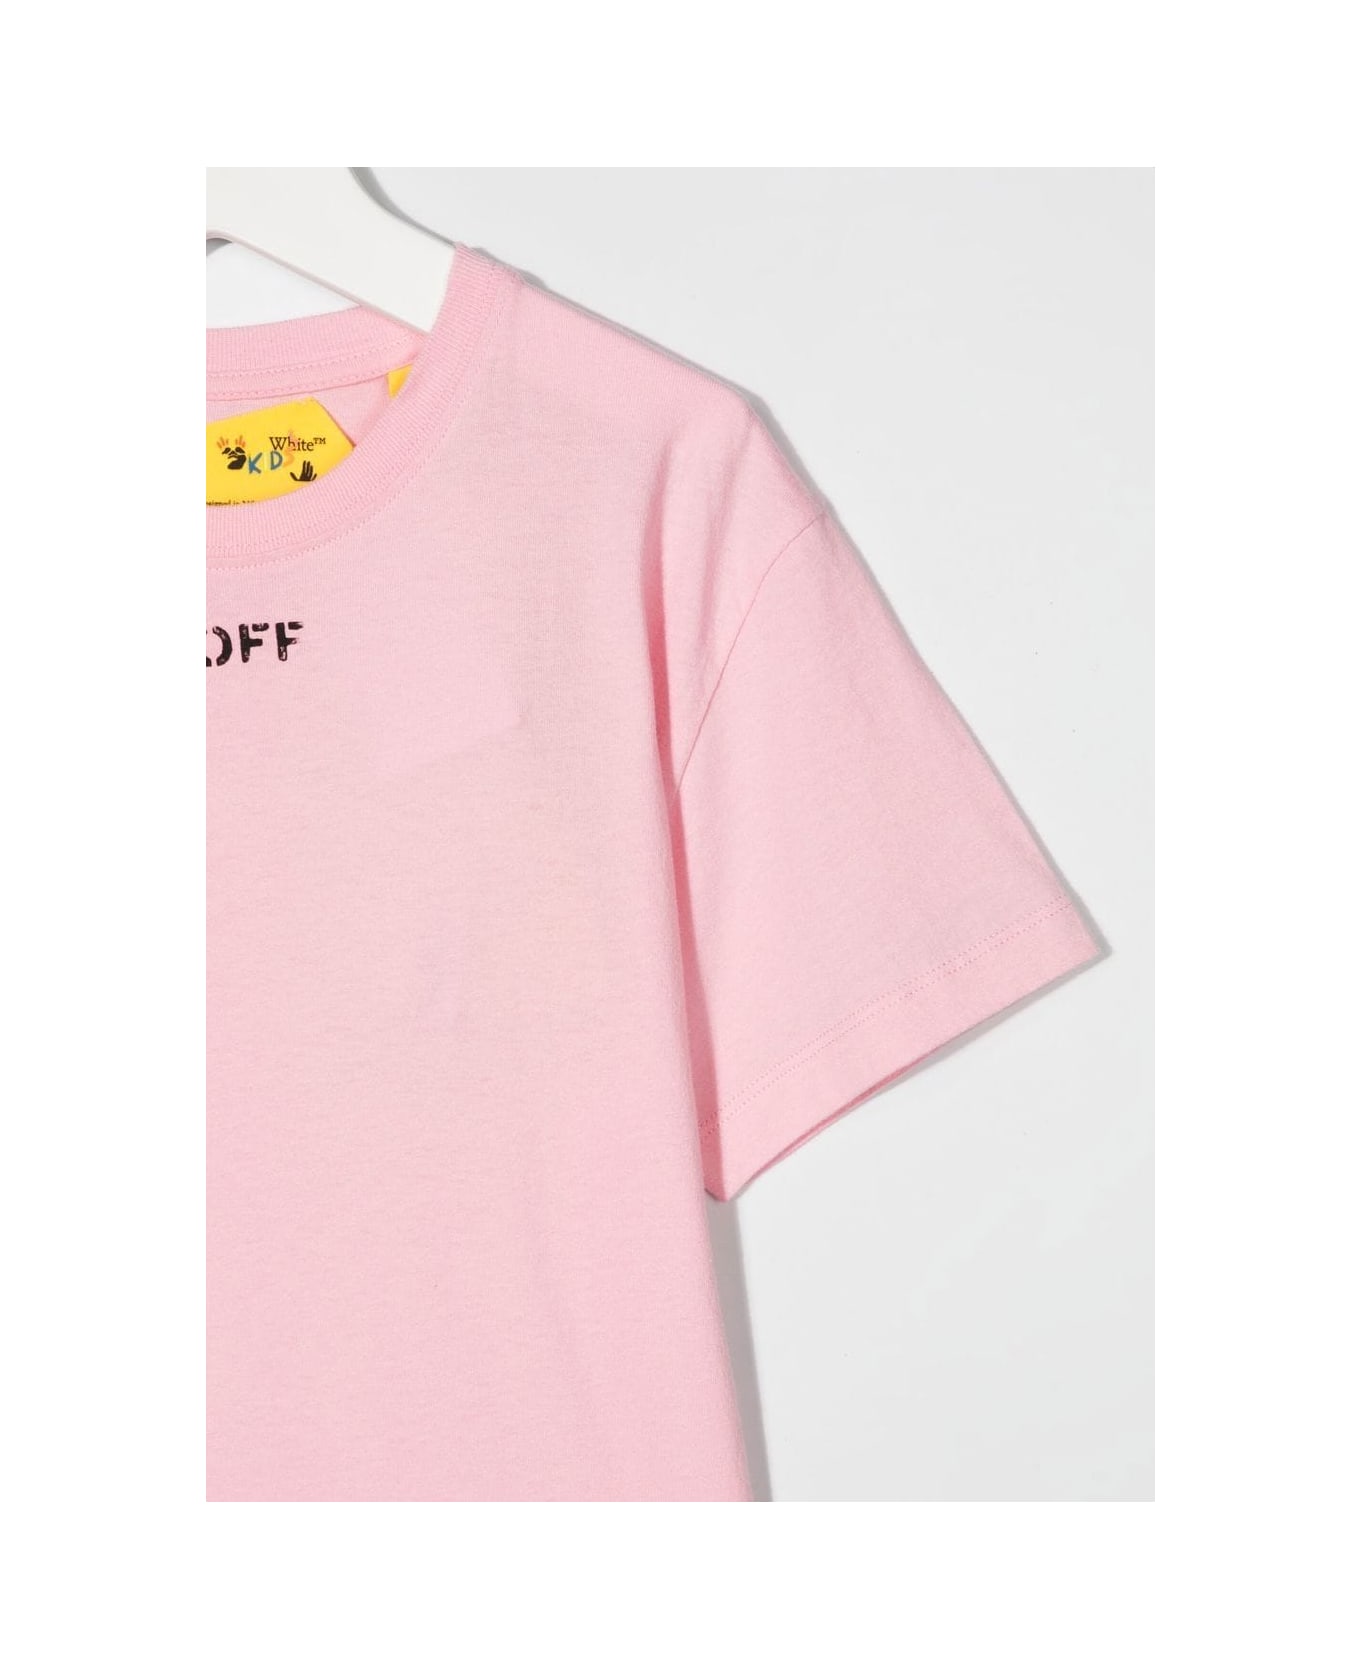 Off-White Kids Pink T-shirt With "off" Stamp - Pink/black